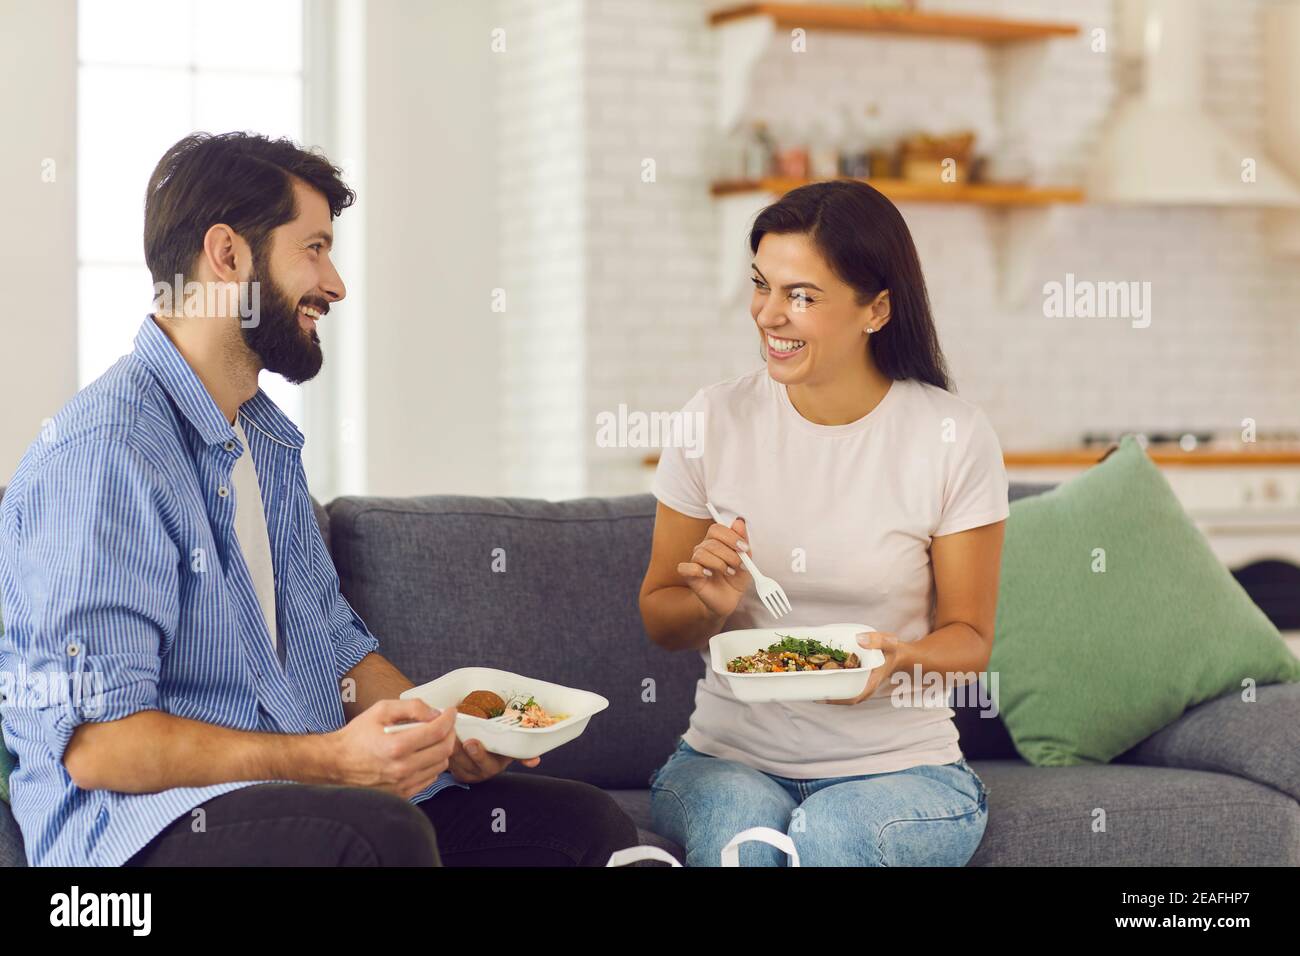 Young smiling couple man and woman sitting at home and eating healthy boxed food Stock Photo